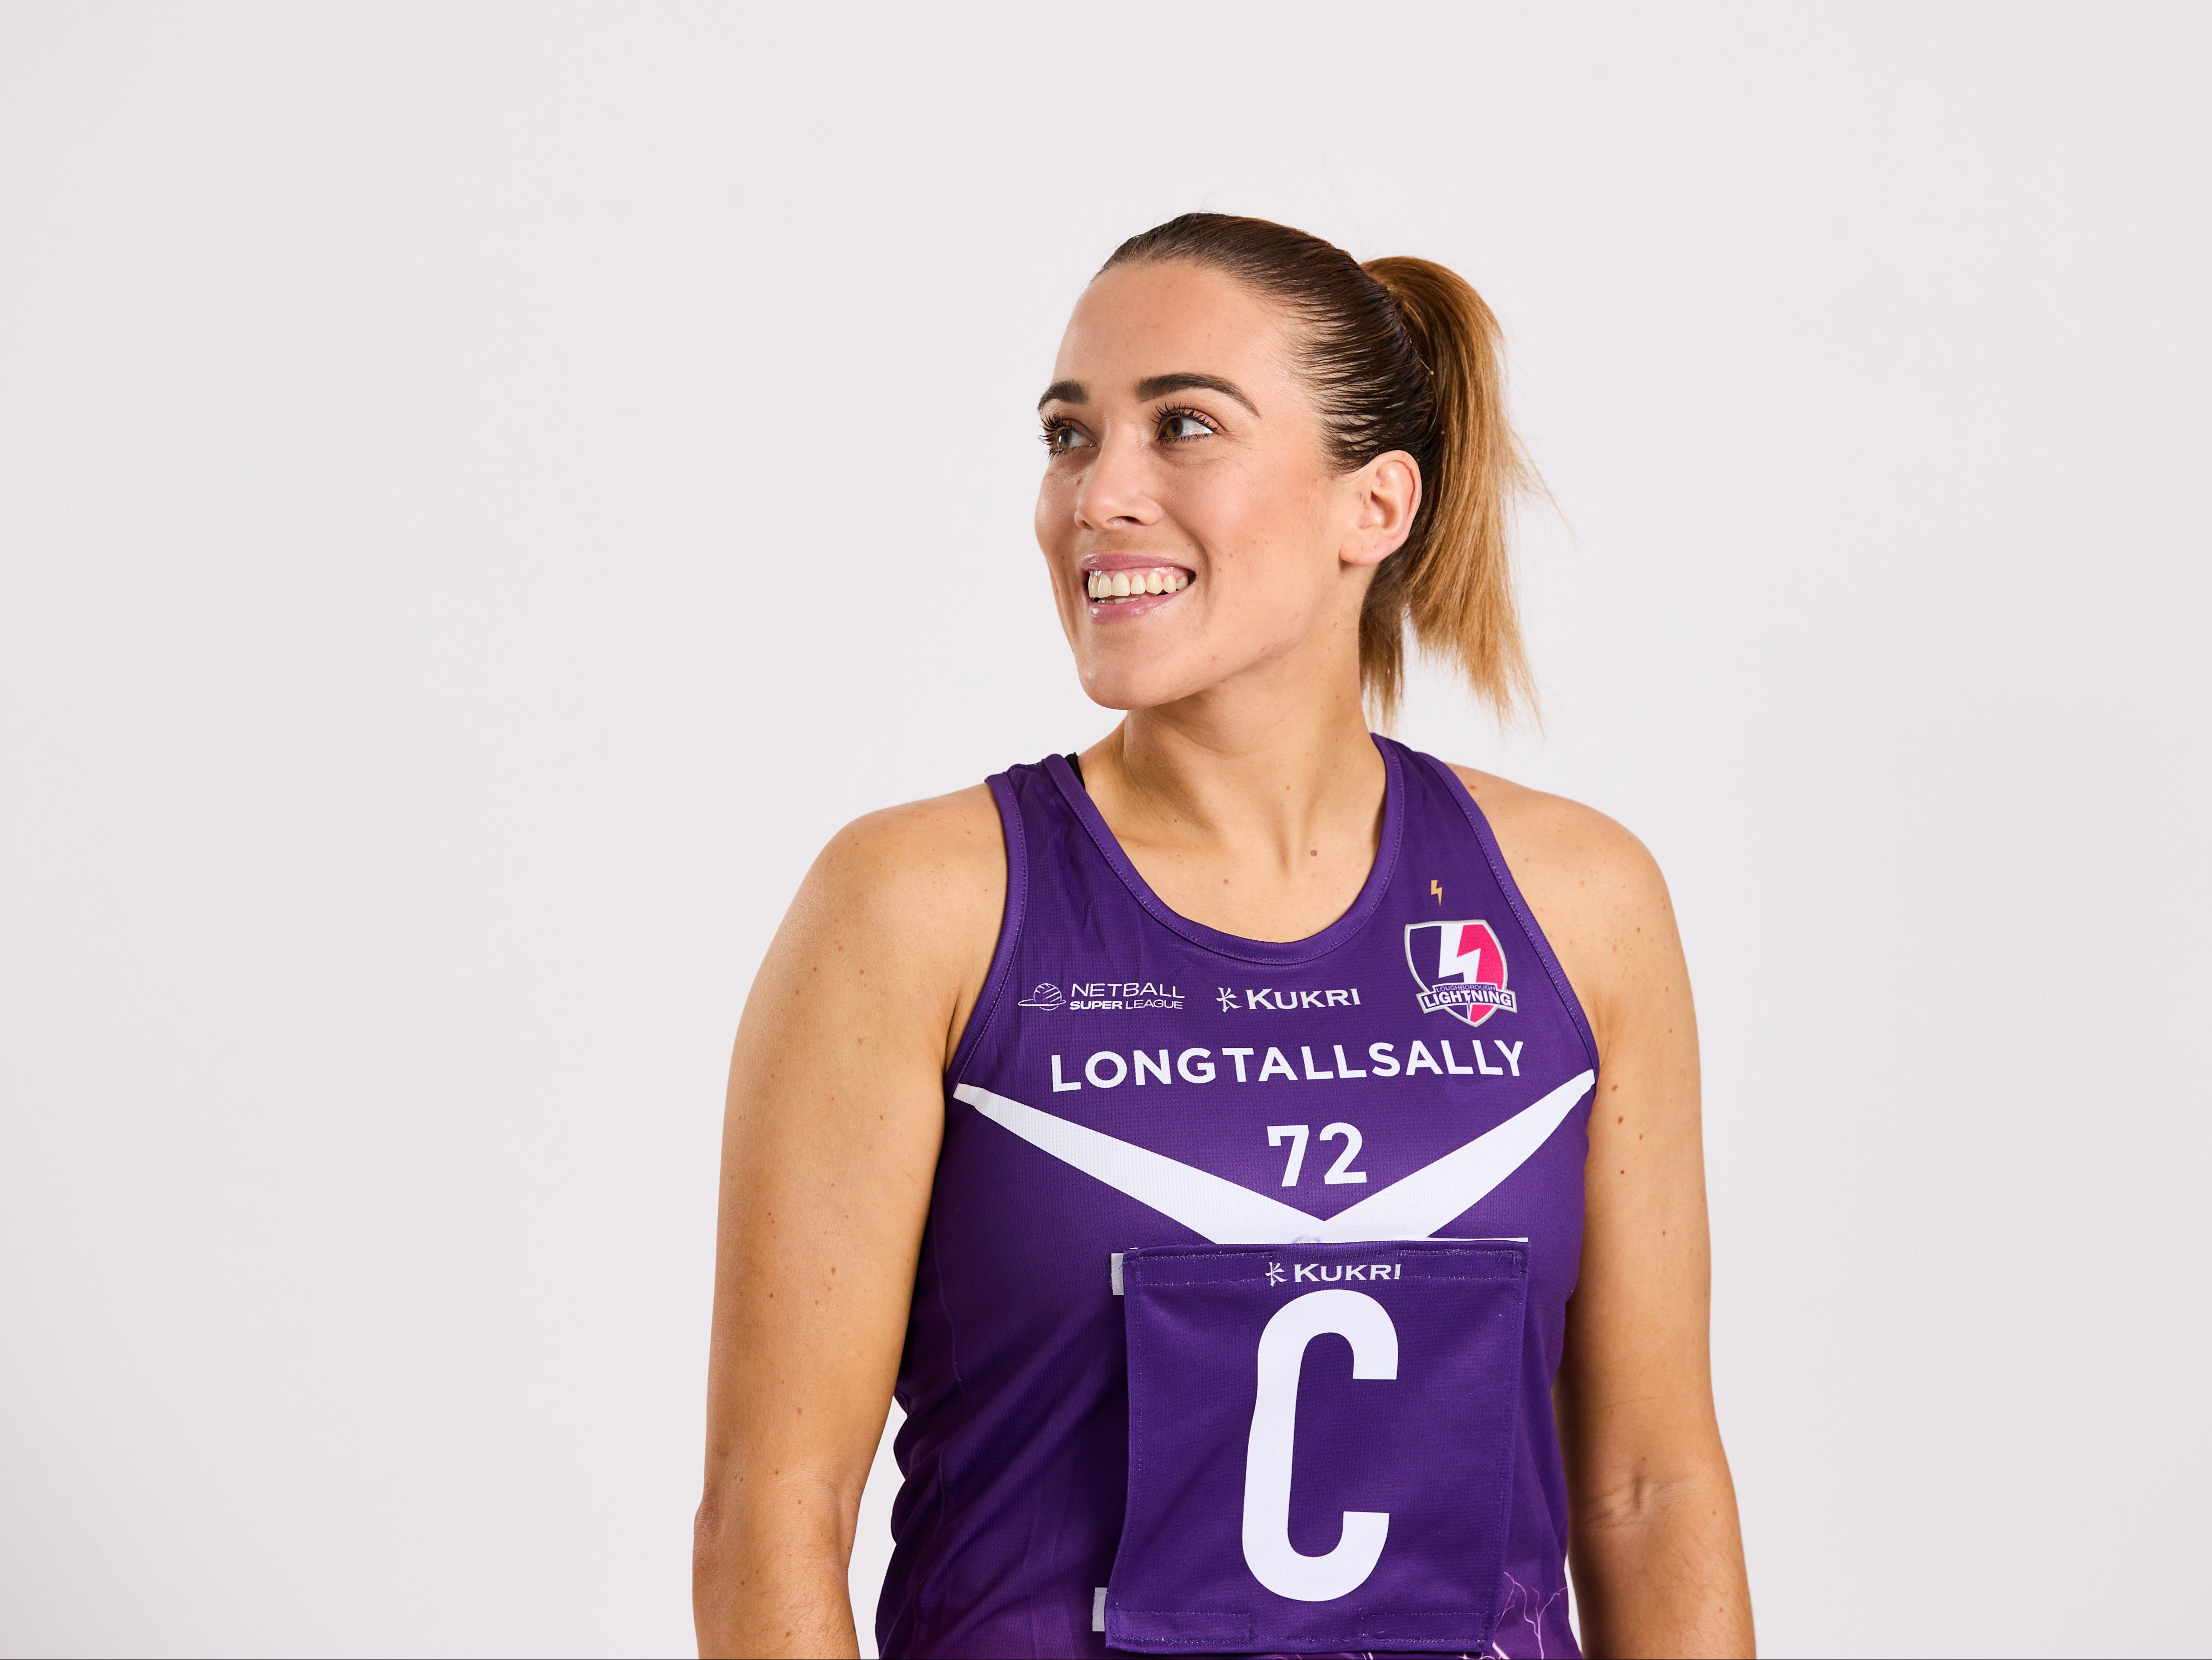 Nat Panagarry’s life has changed ahead of the return of the Netball Super League